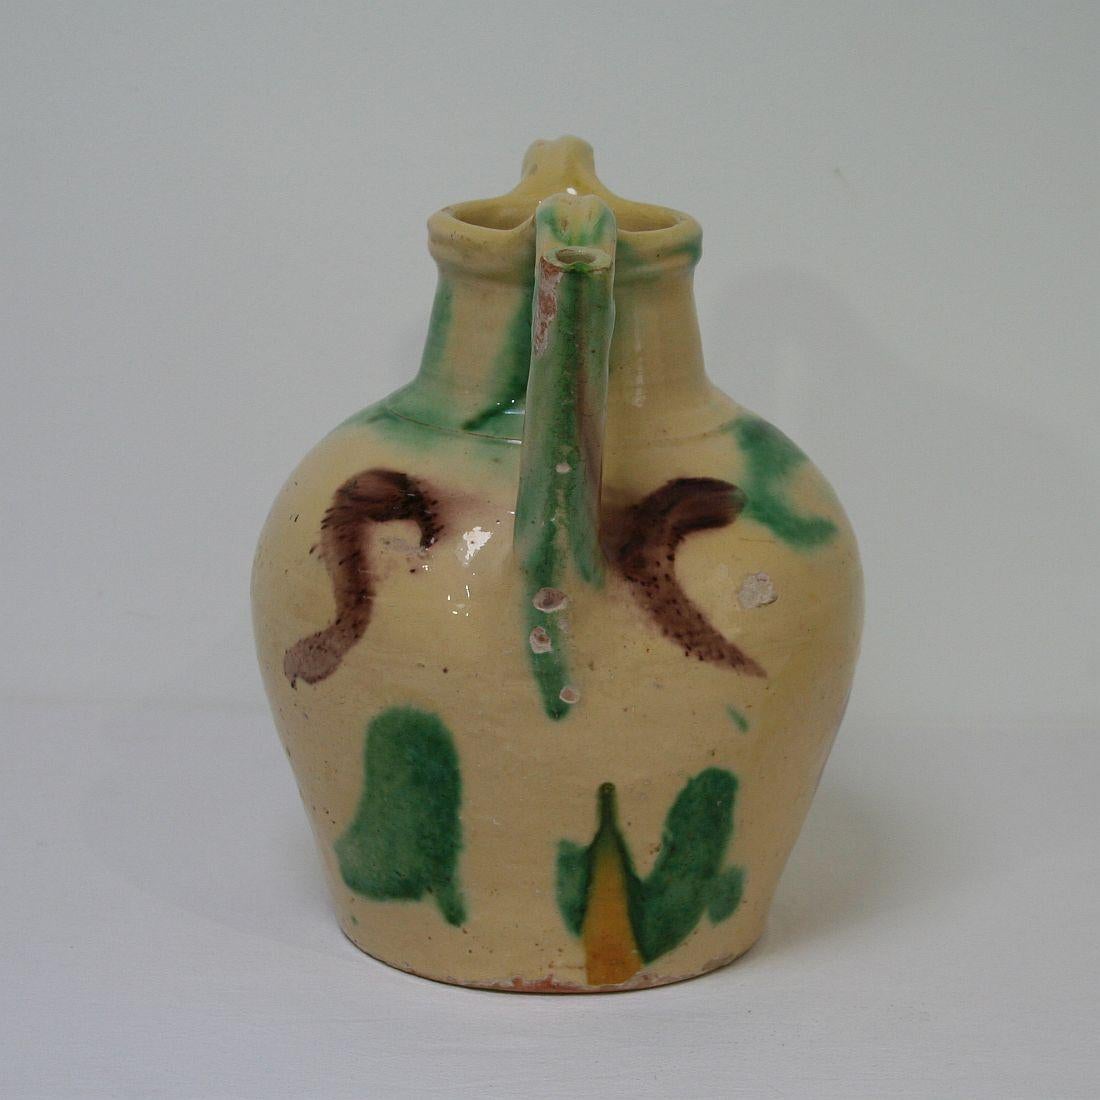 French Provincial 19th Century French Terracotta Jug or Water Cruche